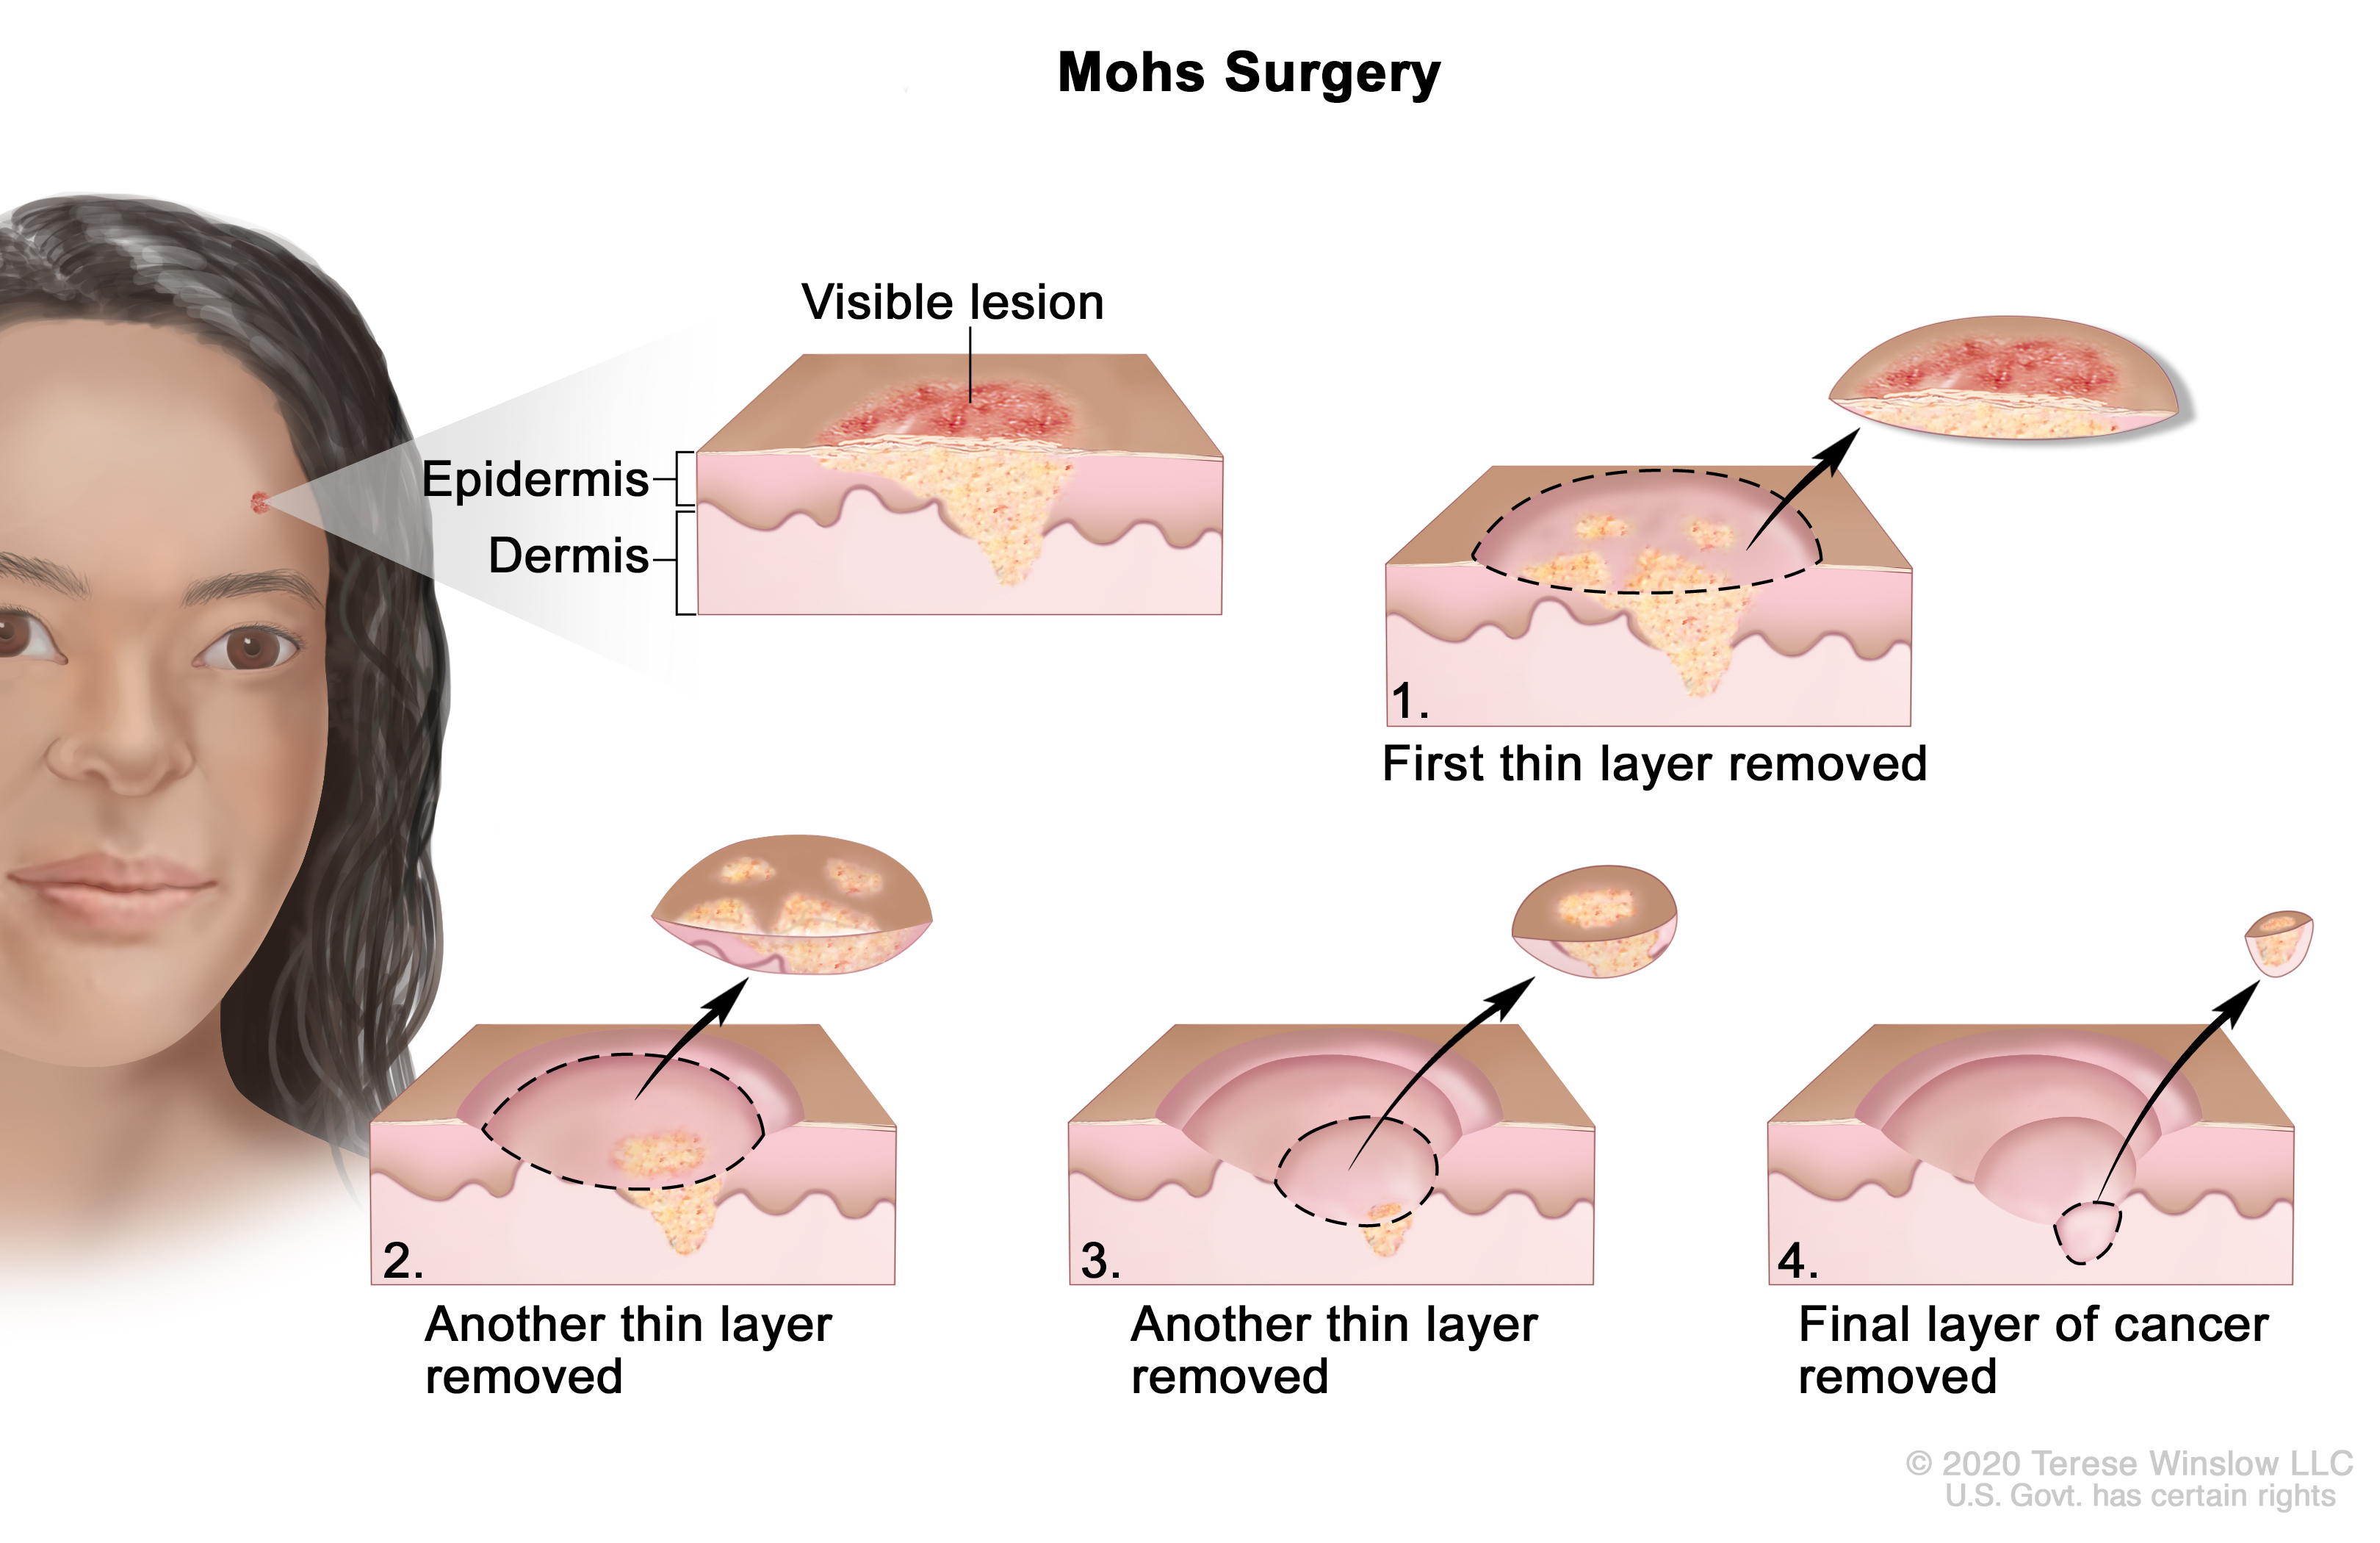 A diagram illustrating the phases of the Mohs surgery procedure.